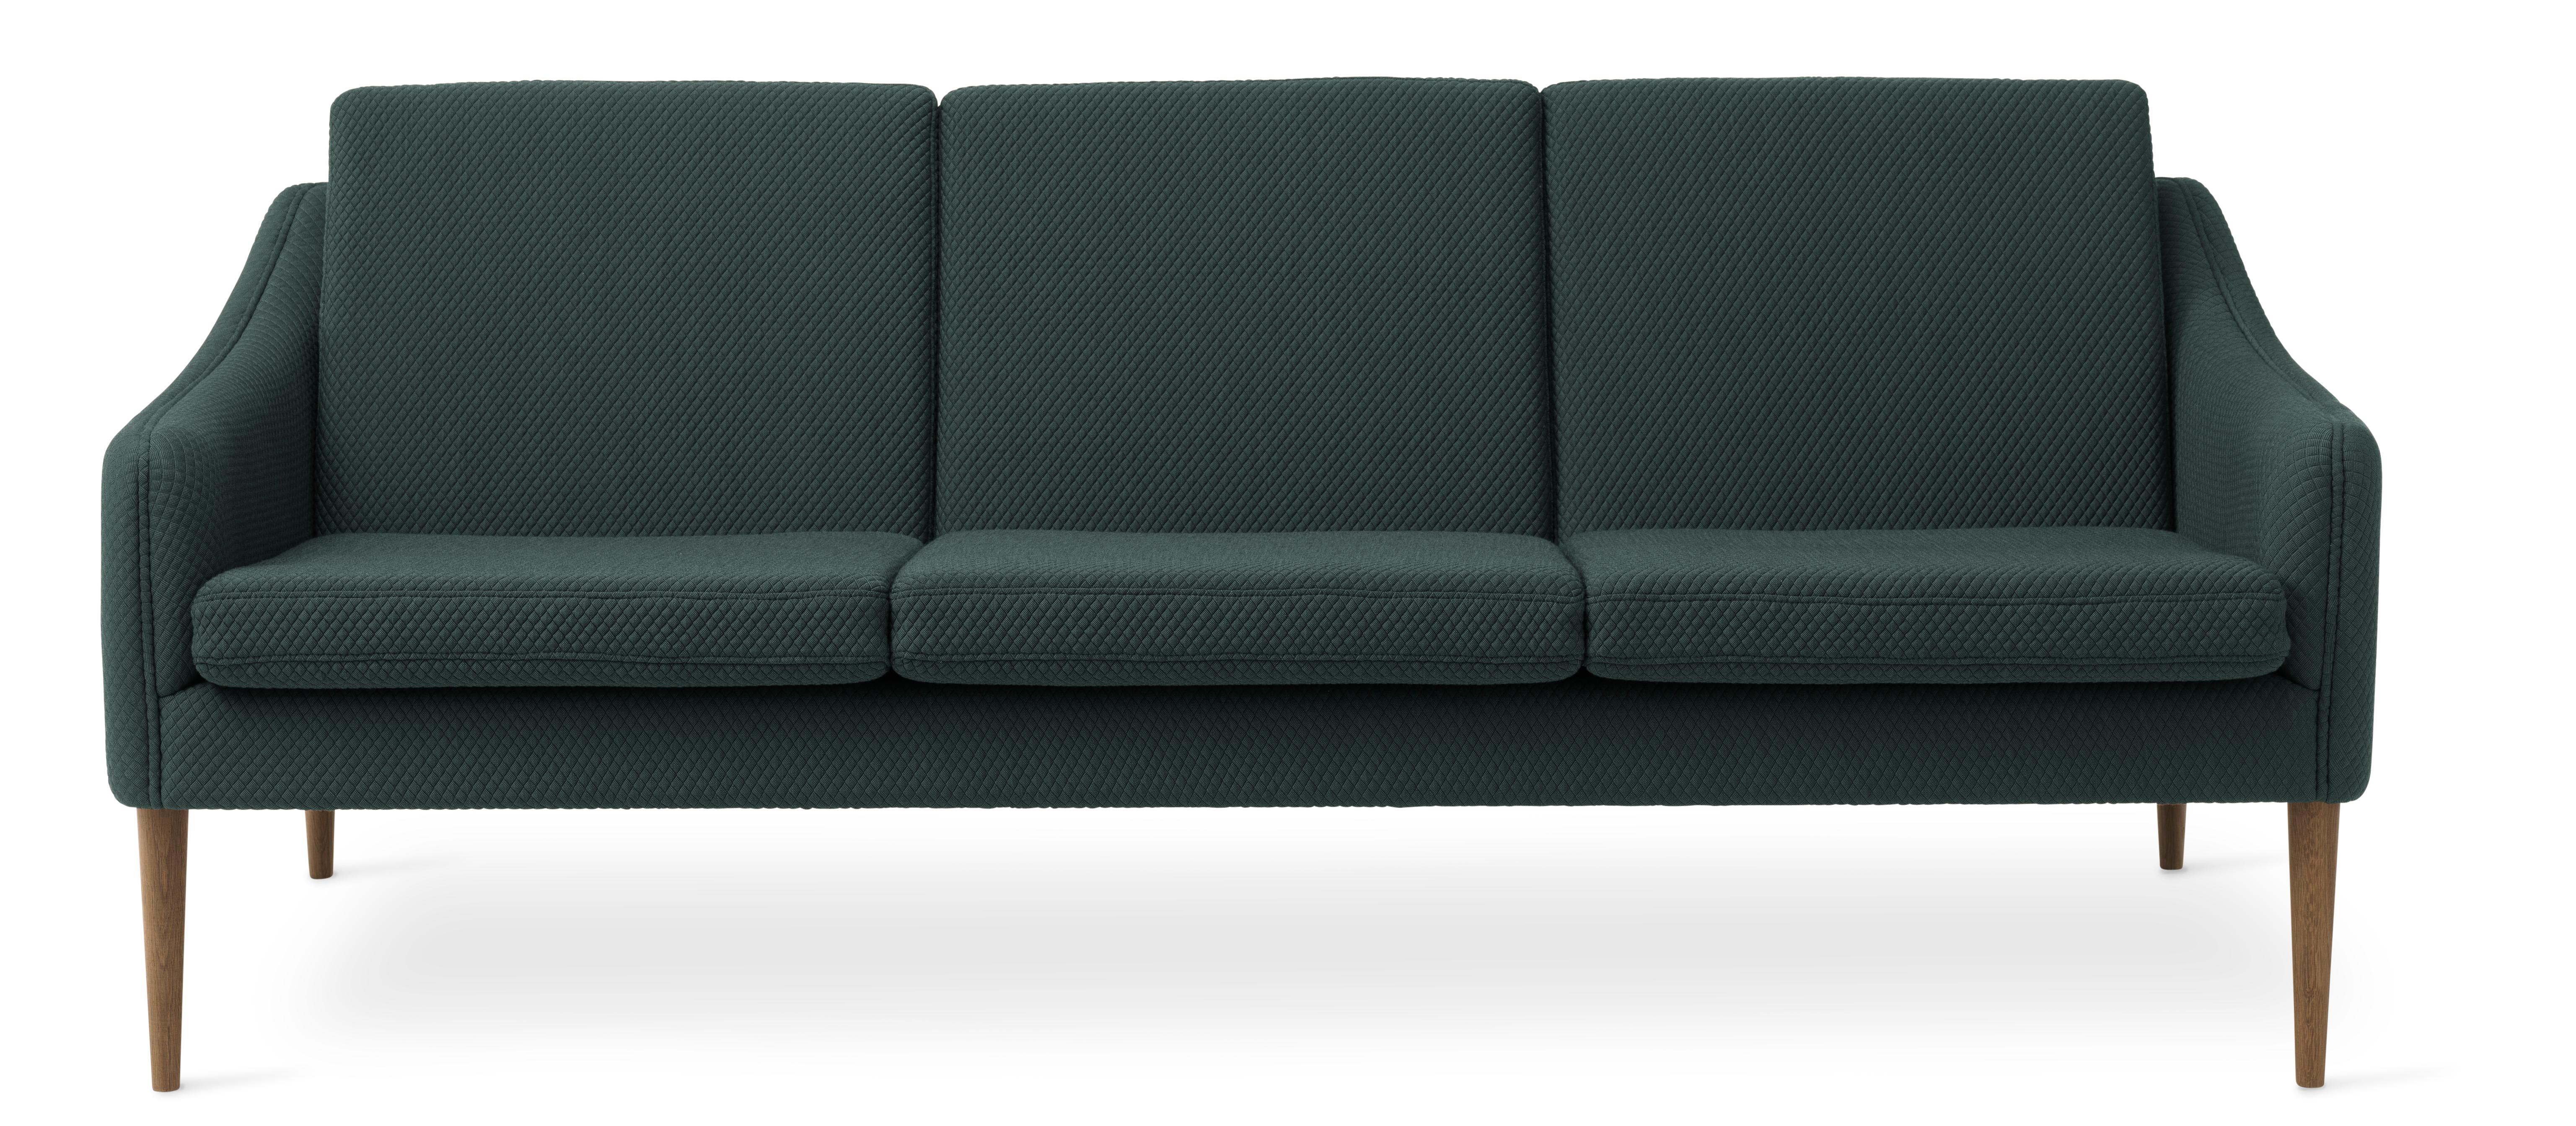 For Sale: Green (Mosaic 972) Mr. Olsen 3-Seat Sofa with Smoked Oak Legs, by Hans Olsen from Warm Nordic